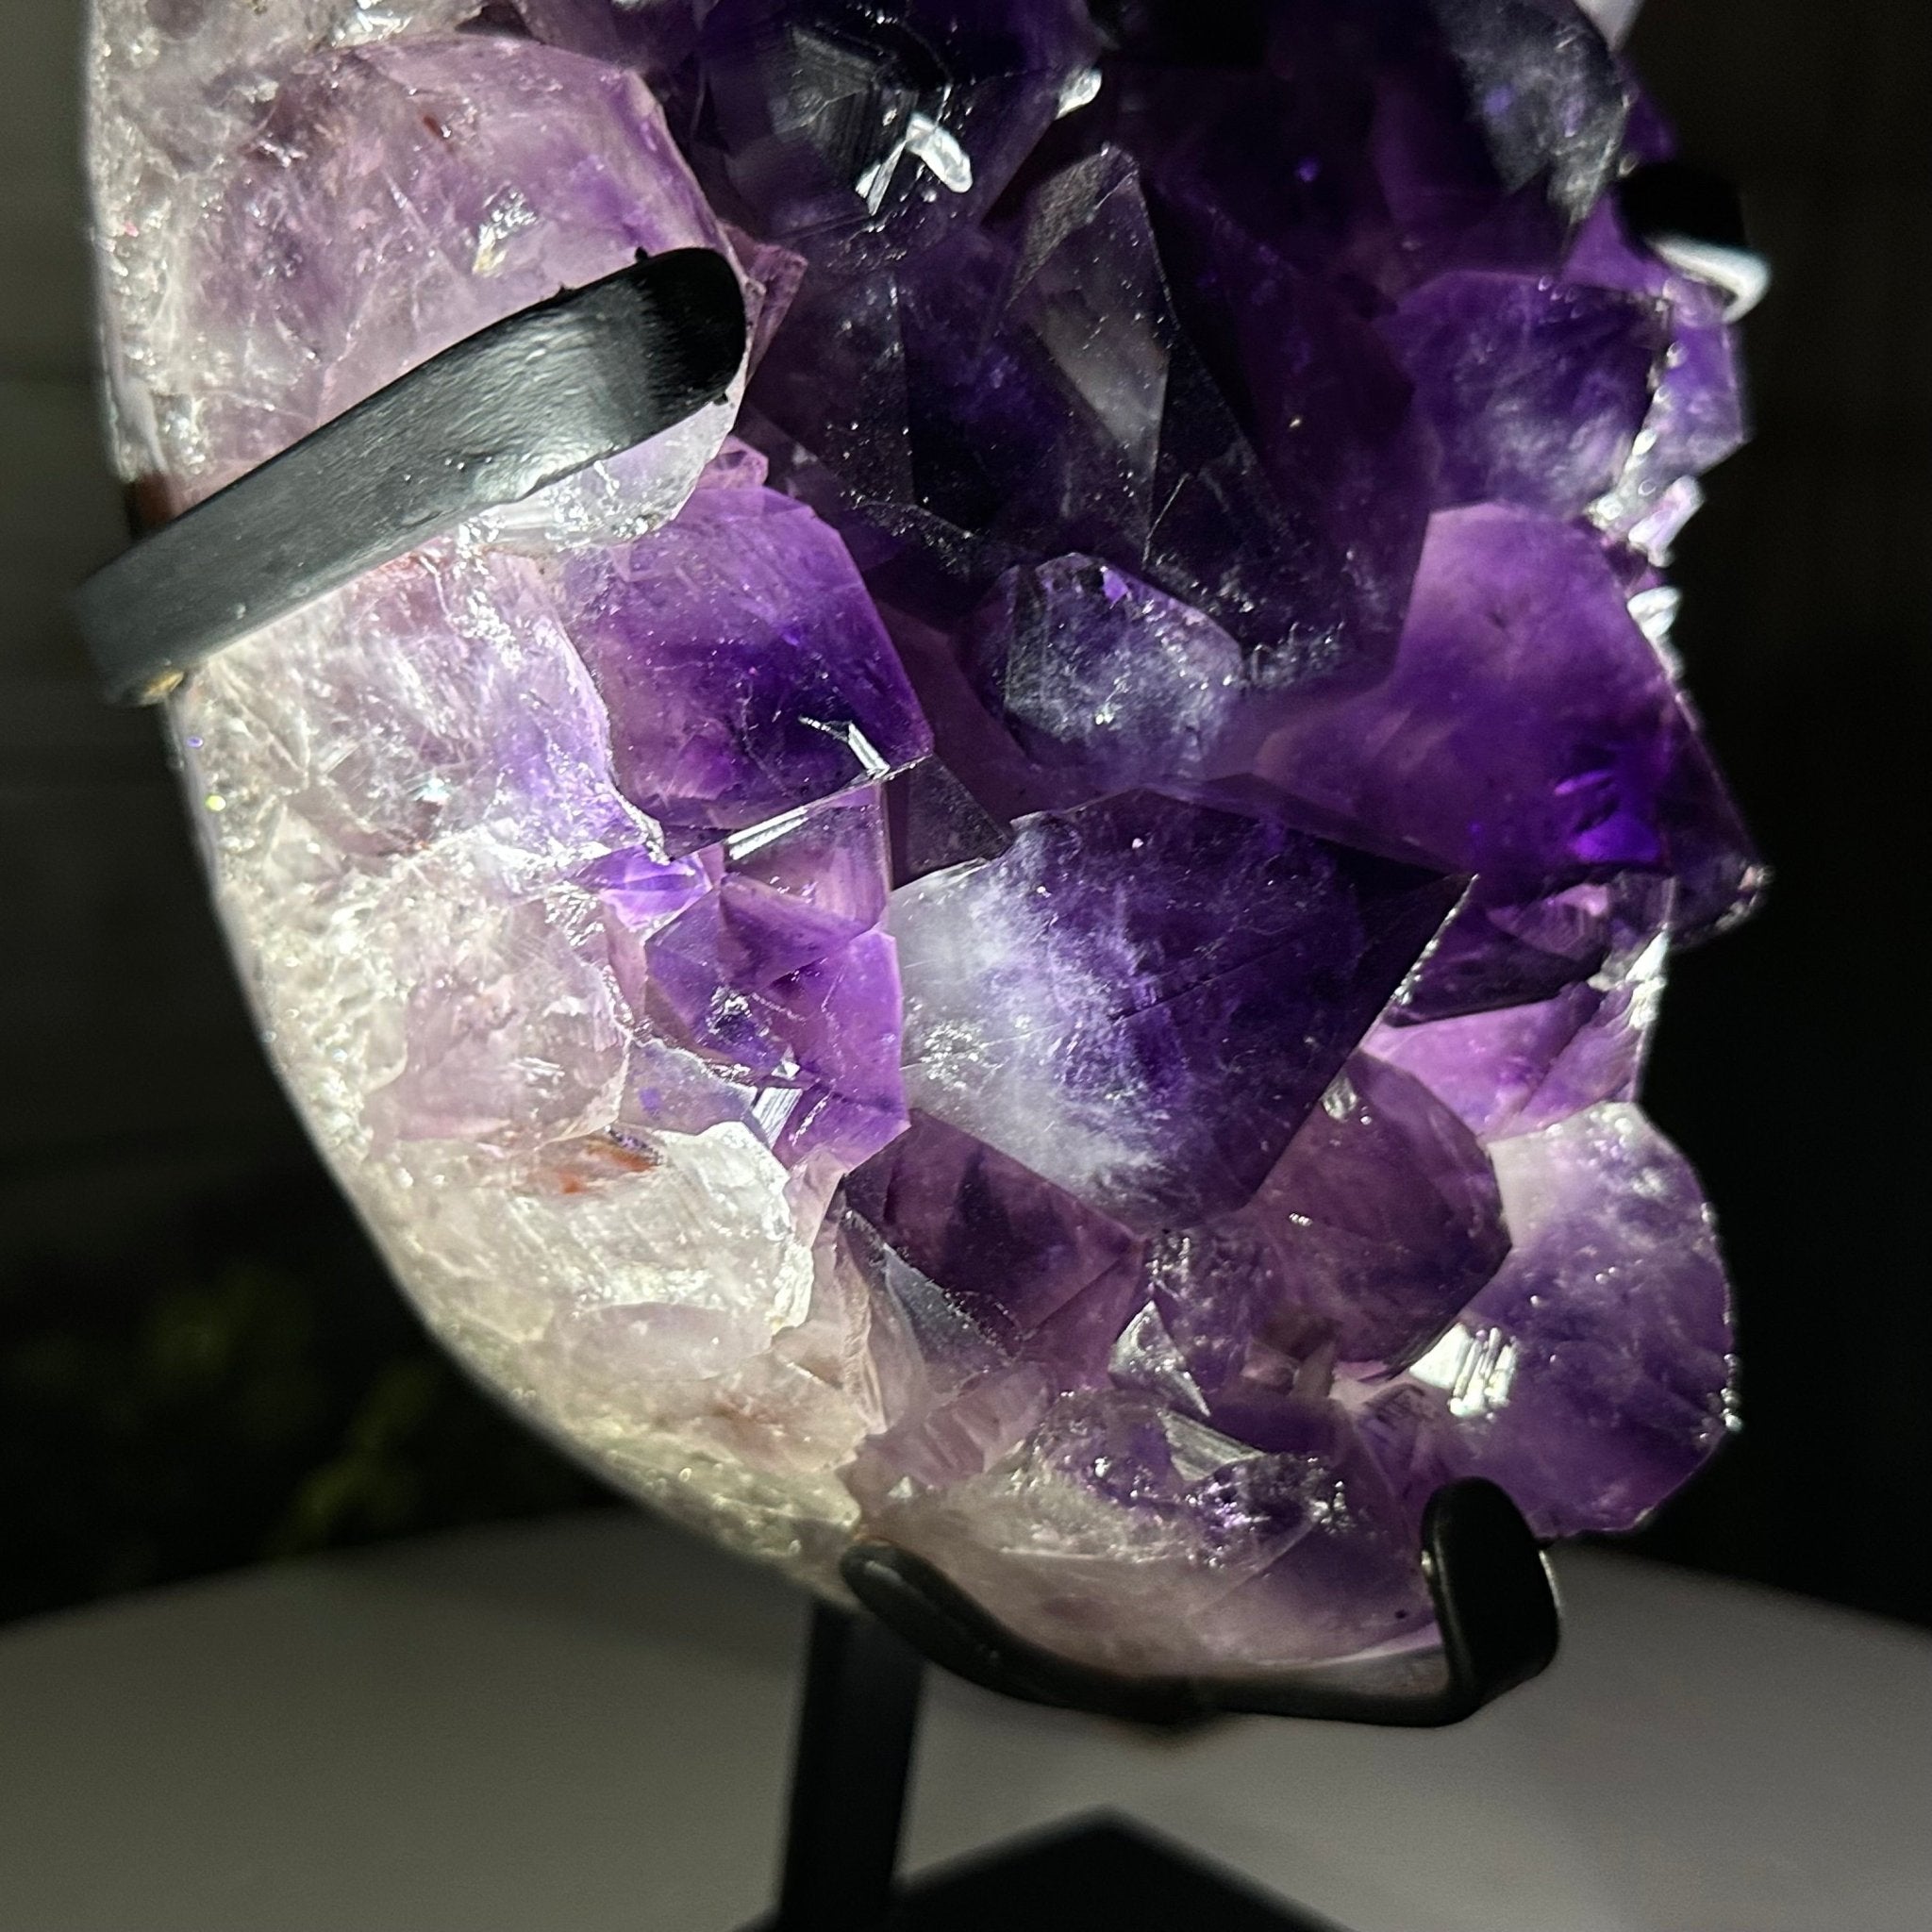 Super Quality Amethyst Cluster on a Metal Stand, 6.3 lbs & 8.8" Tall #5491-0156 - Brazil GemsBrazil GemsSuper Quality Amethyst Cluster on a Metal Stand, 6.3 lbs & 8.8" Tall #5491-0156Clusters on Fixed Bases5491-0156